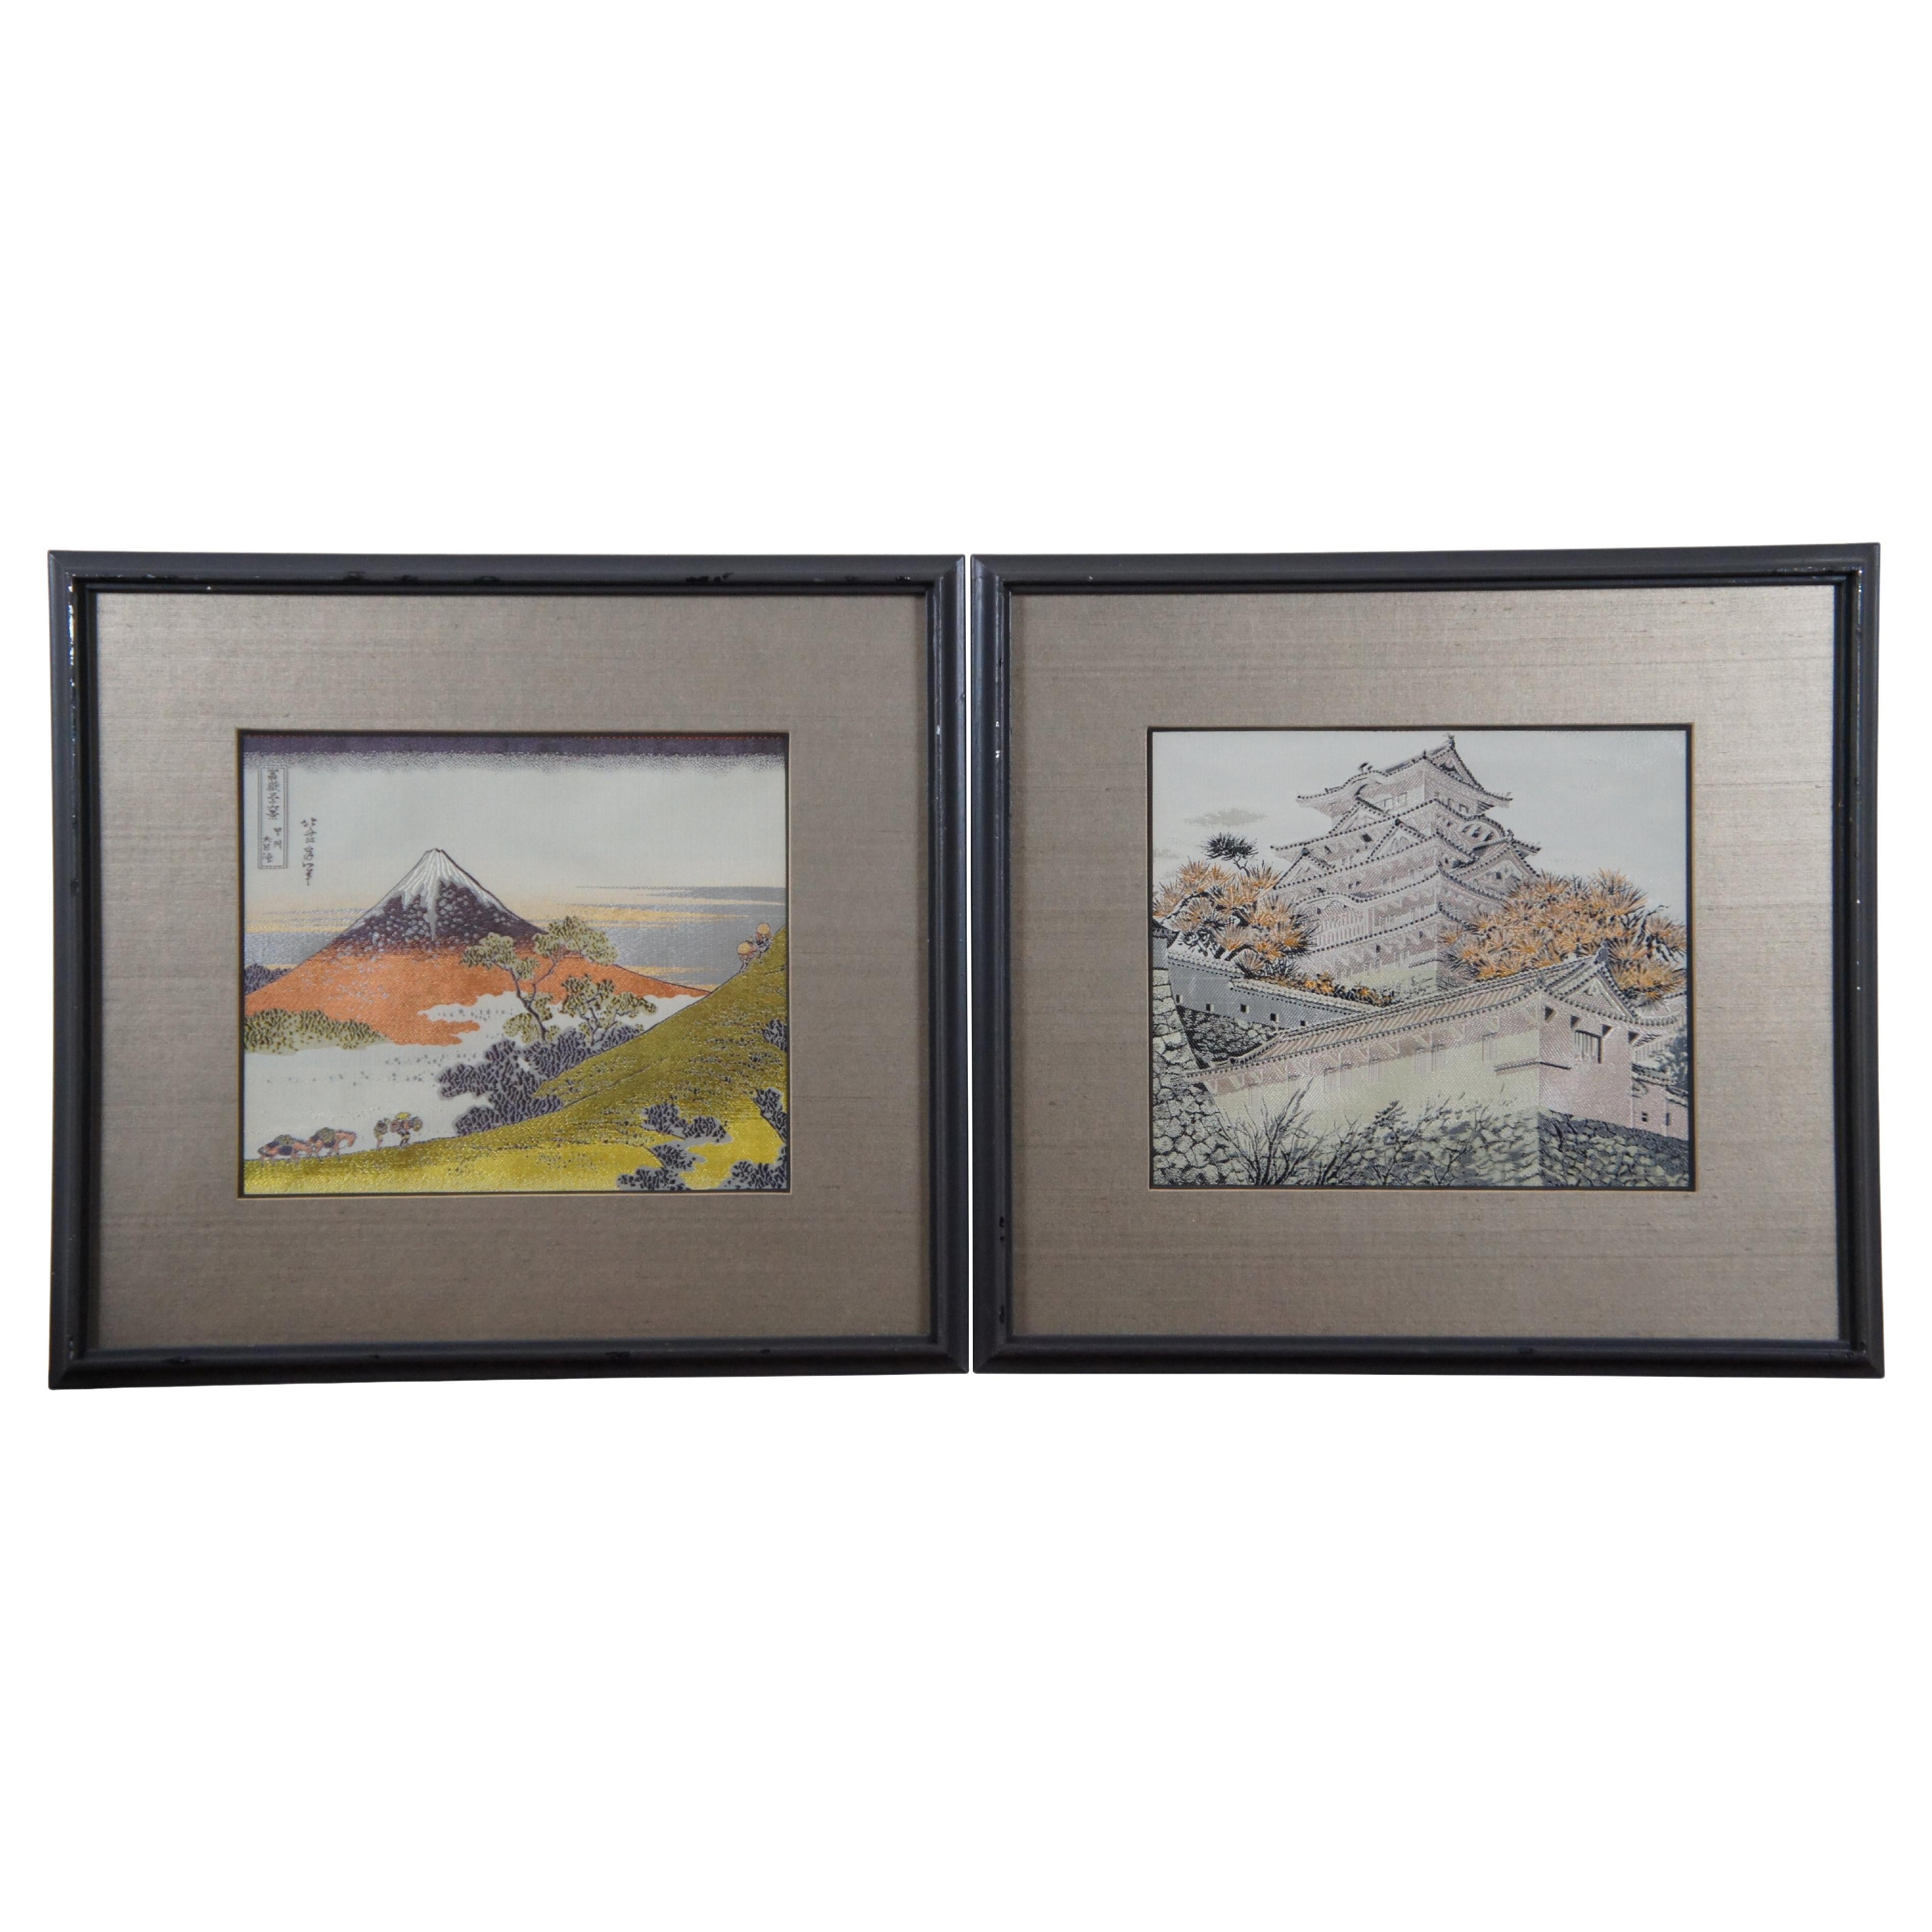 2 Japanese Silk Embroidered Framed Textiles Inume Pass Mt Fuji Himeji Castle 19"